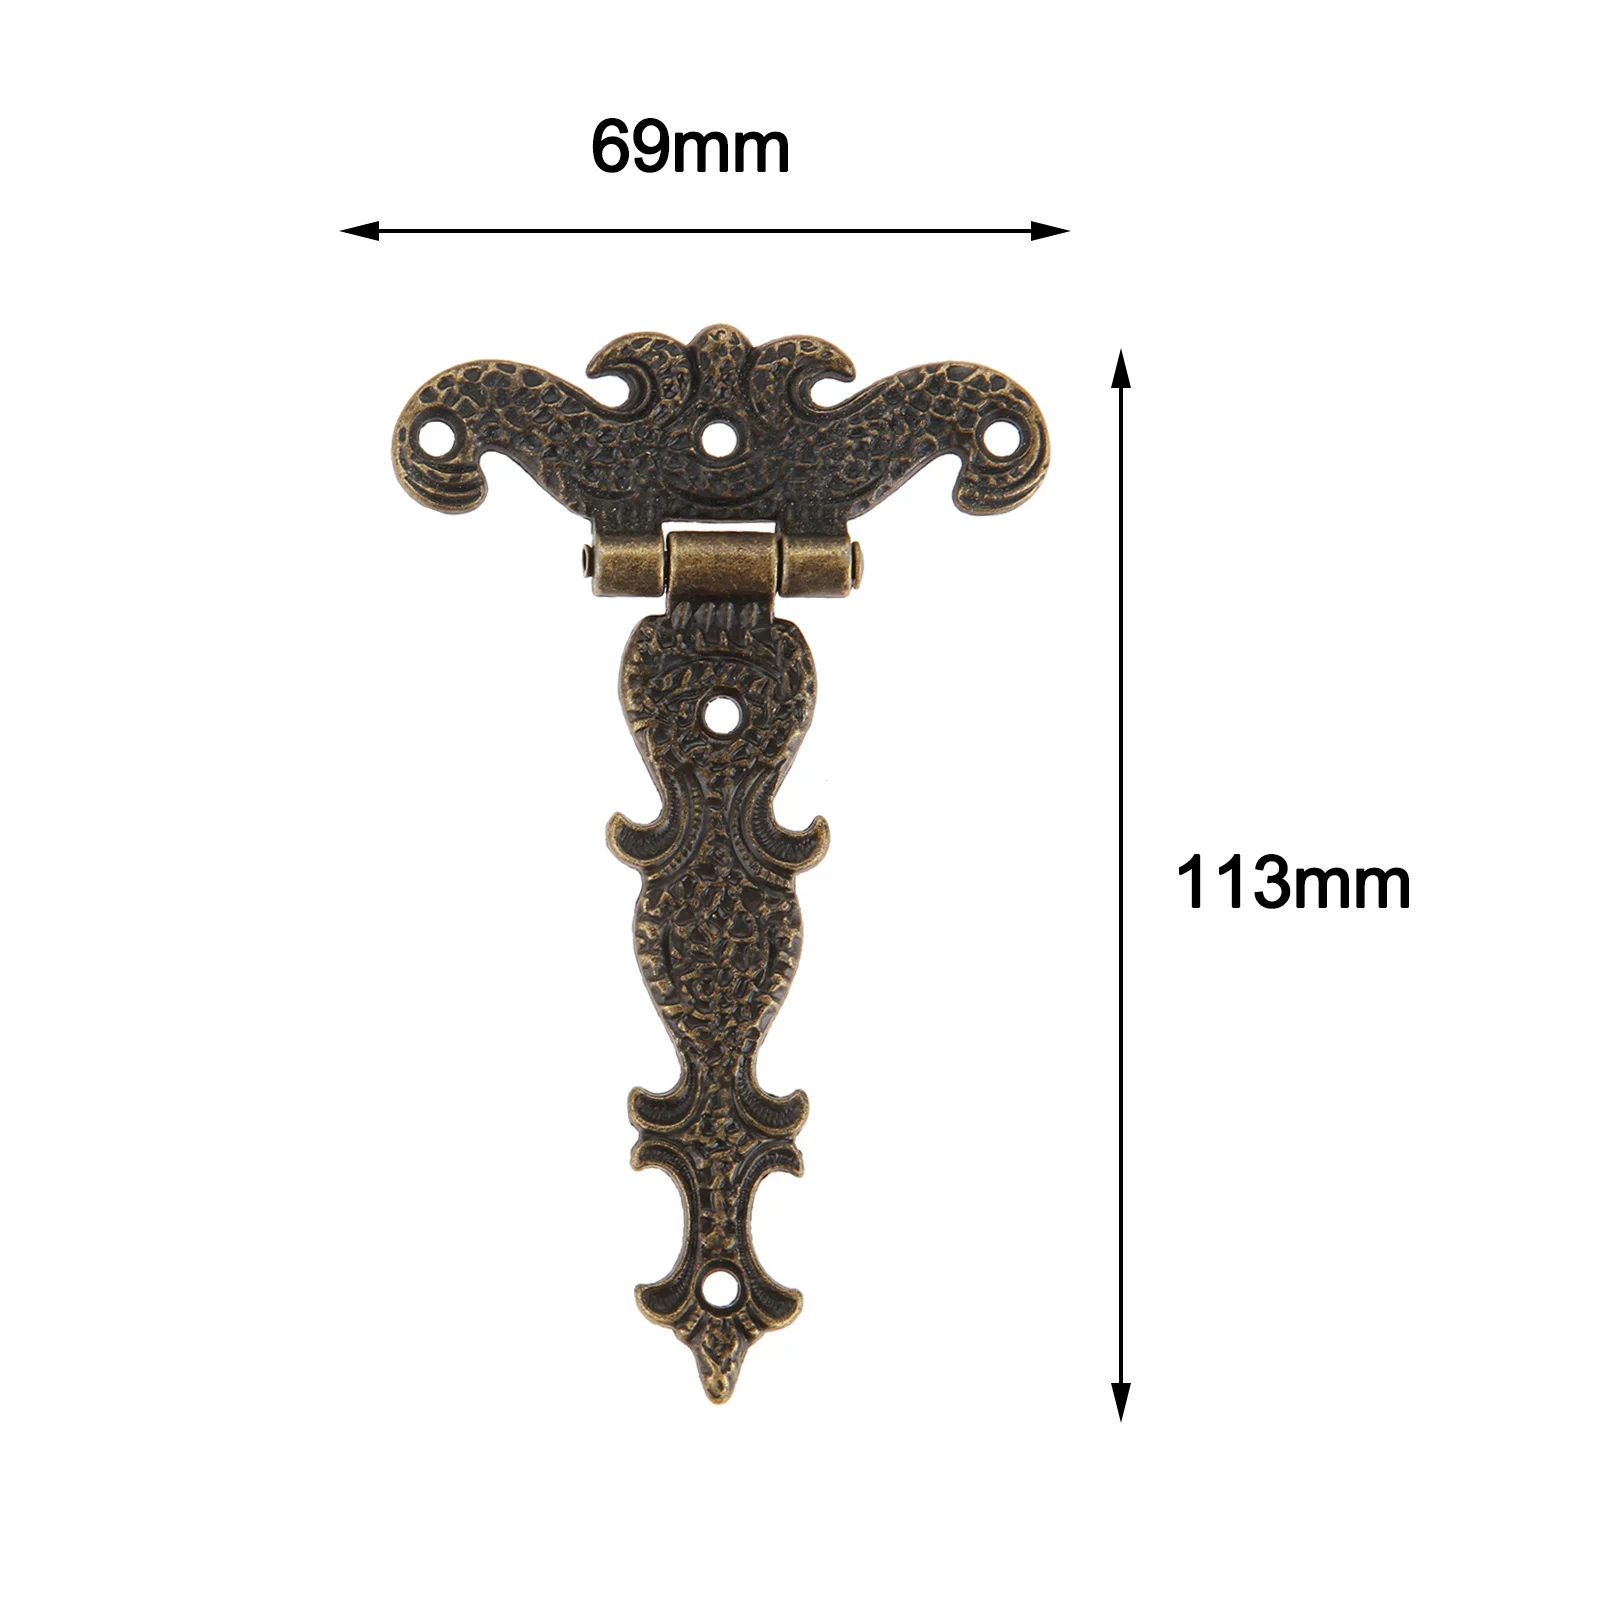 DRELD 2Pcs Vintage Brass Plated Big Decorative Hinge Cabinet Door Butt Hinges for Jewelry Wooden Box Furniture Fittings 113*69mm